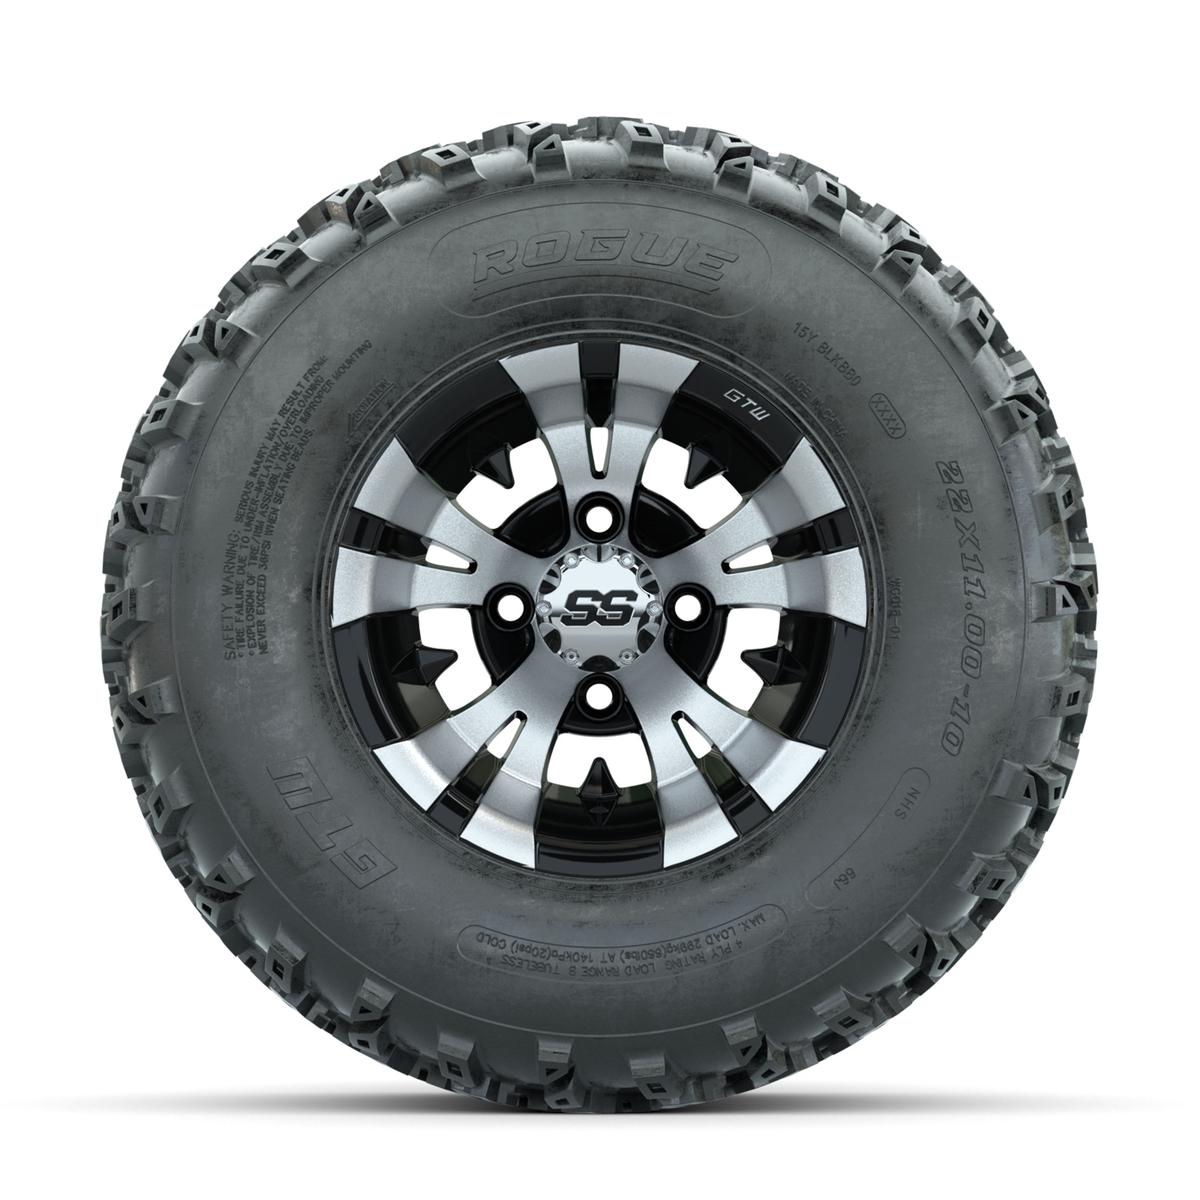 GTW Vampire Machined/Black 10 in Wheels with 22x11.00-10 Rogue All Terrain Tires – Full Set